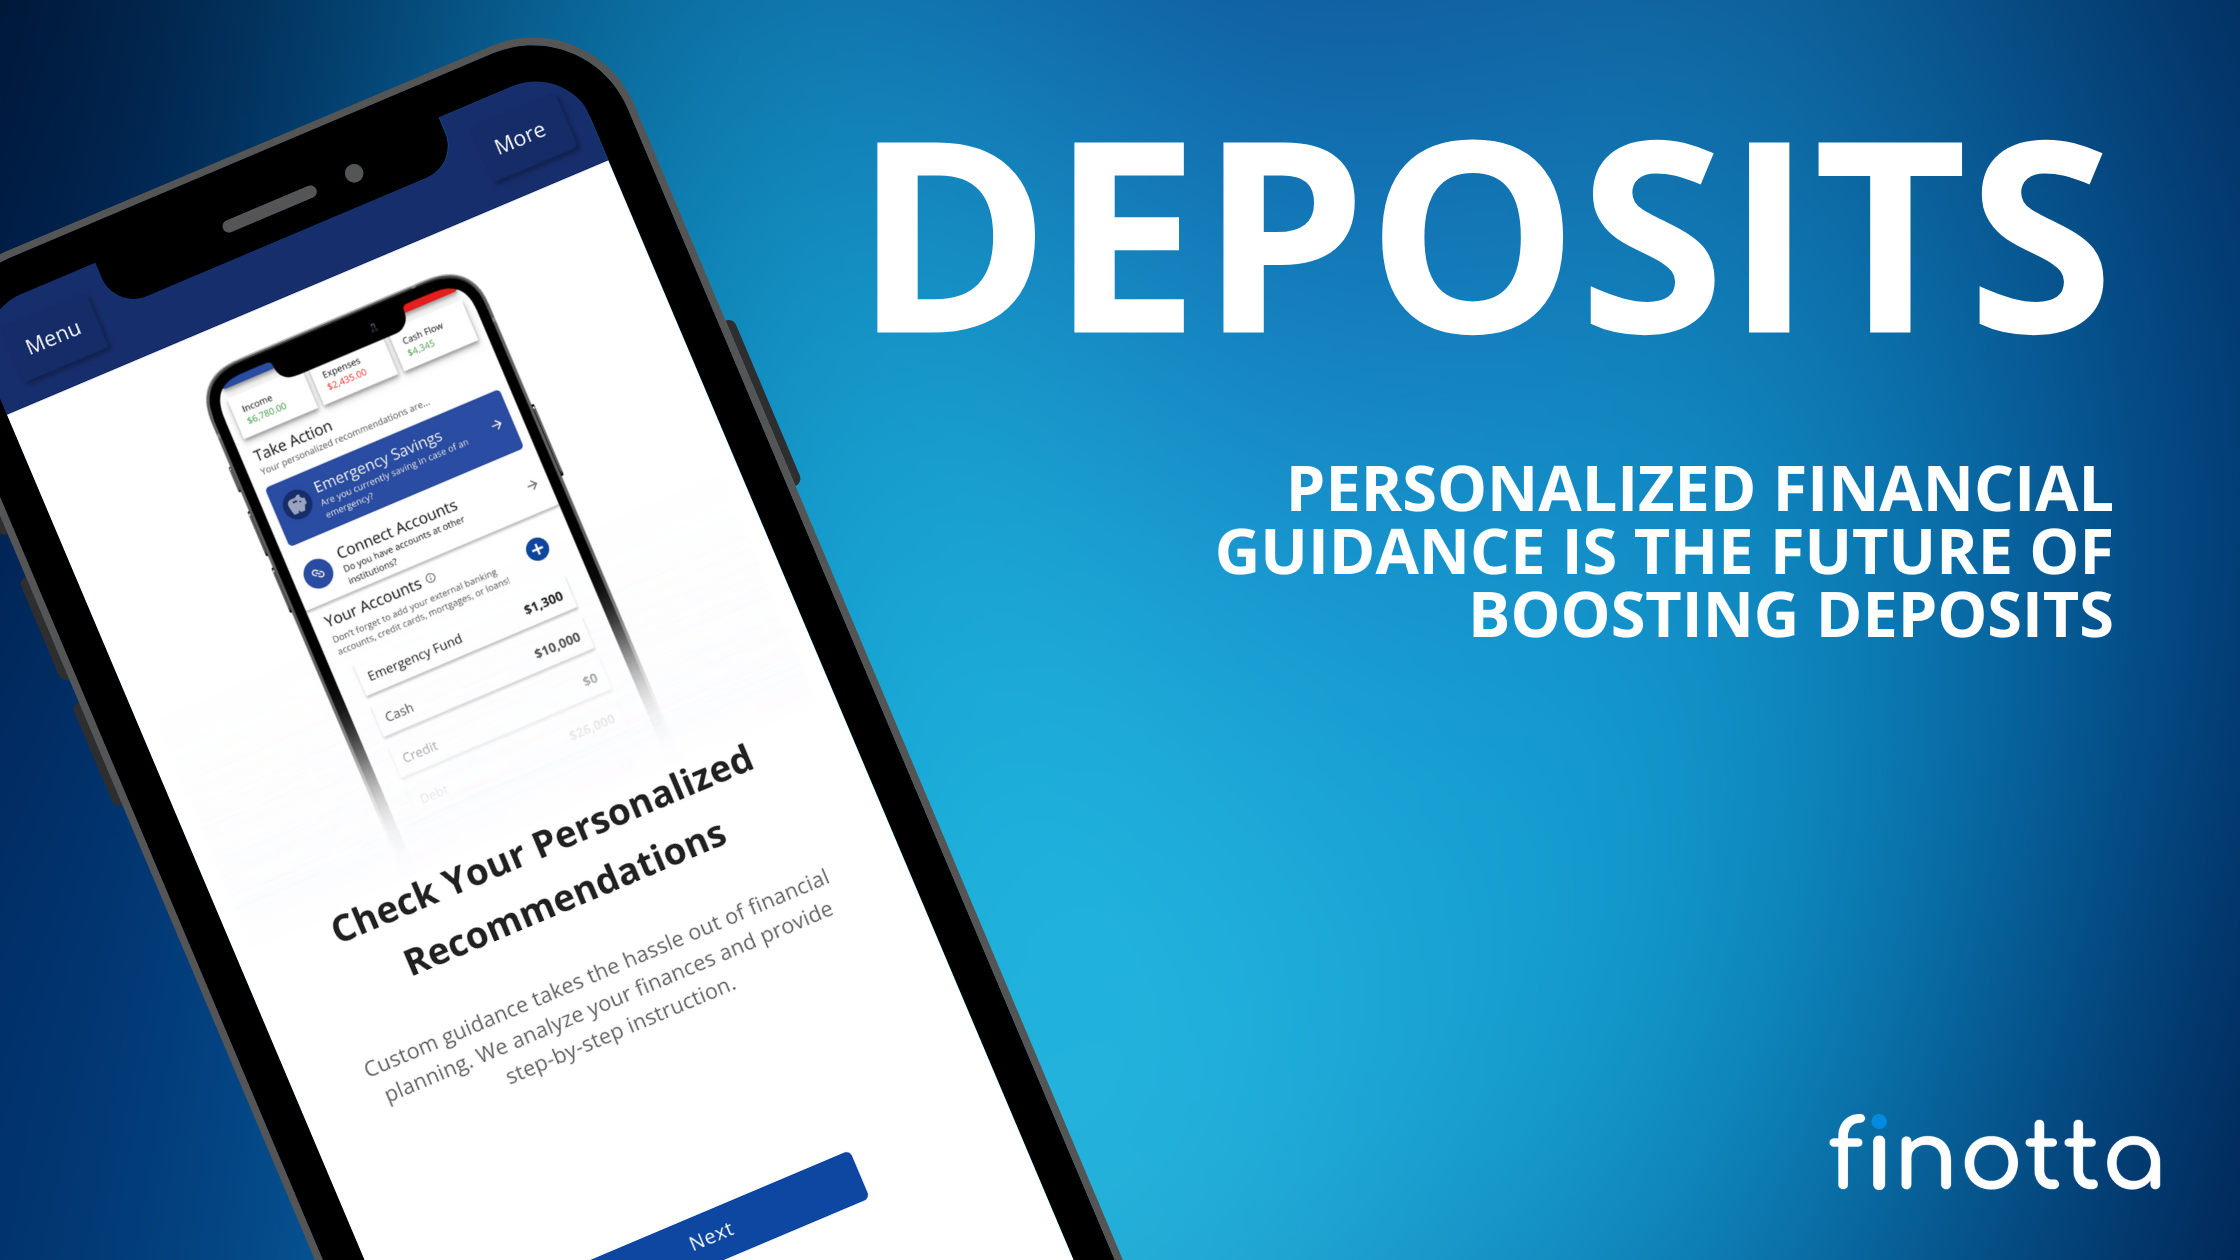 Personalized Financial Guidance is the Future of Boosting Deposits